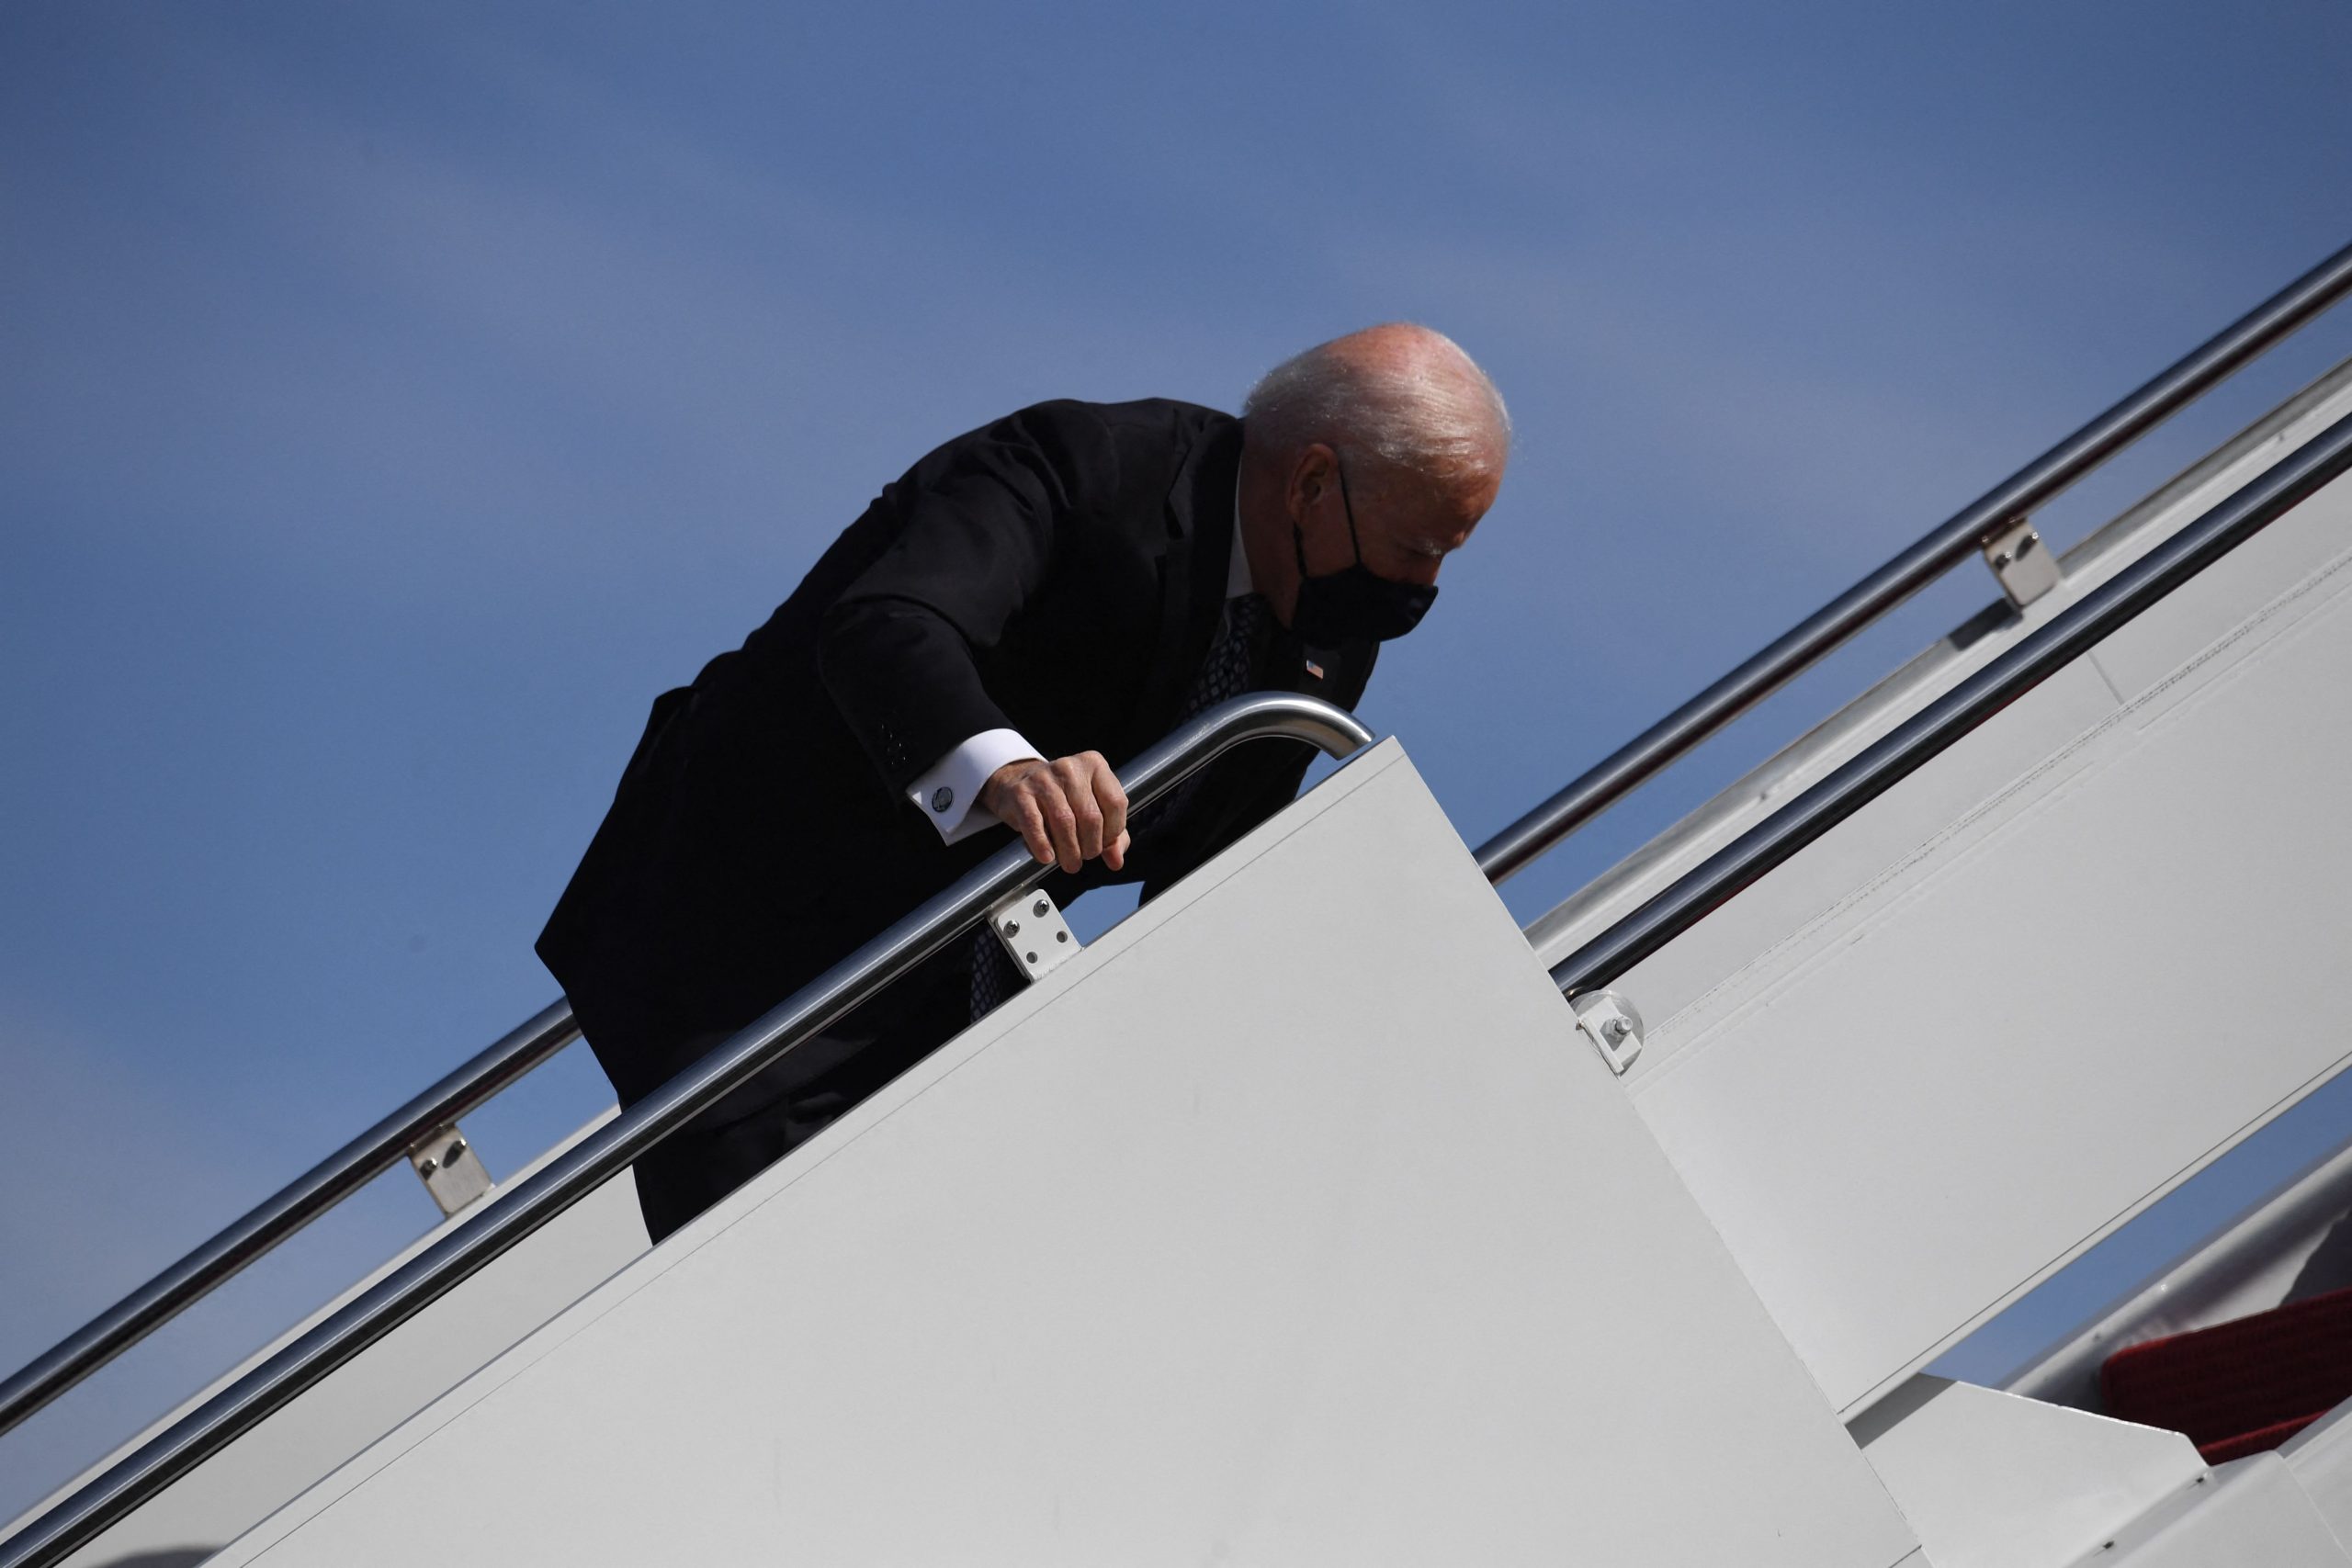 Twitter reacts to President Biden falling on steps while boarding Air Force One